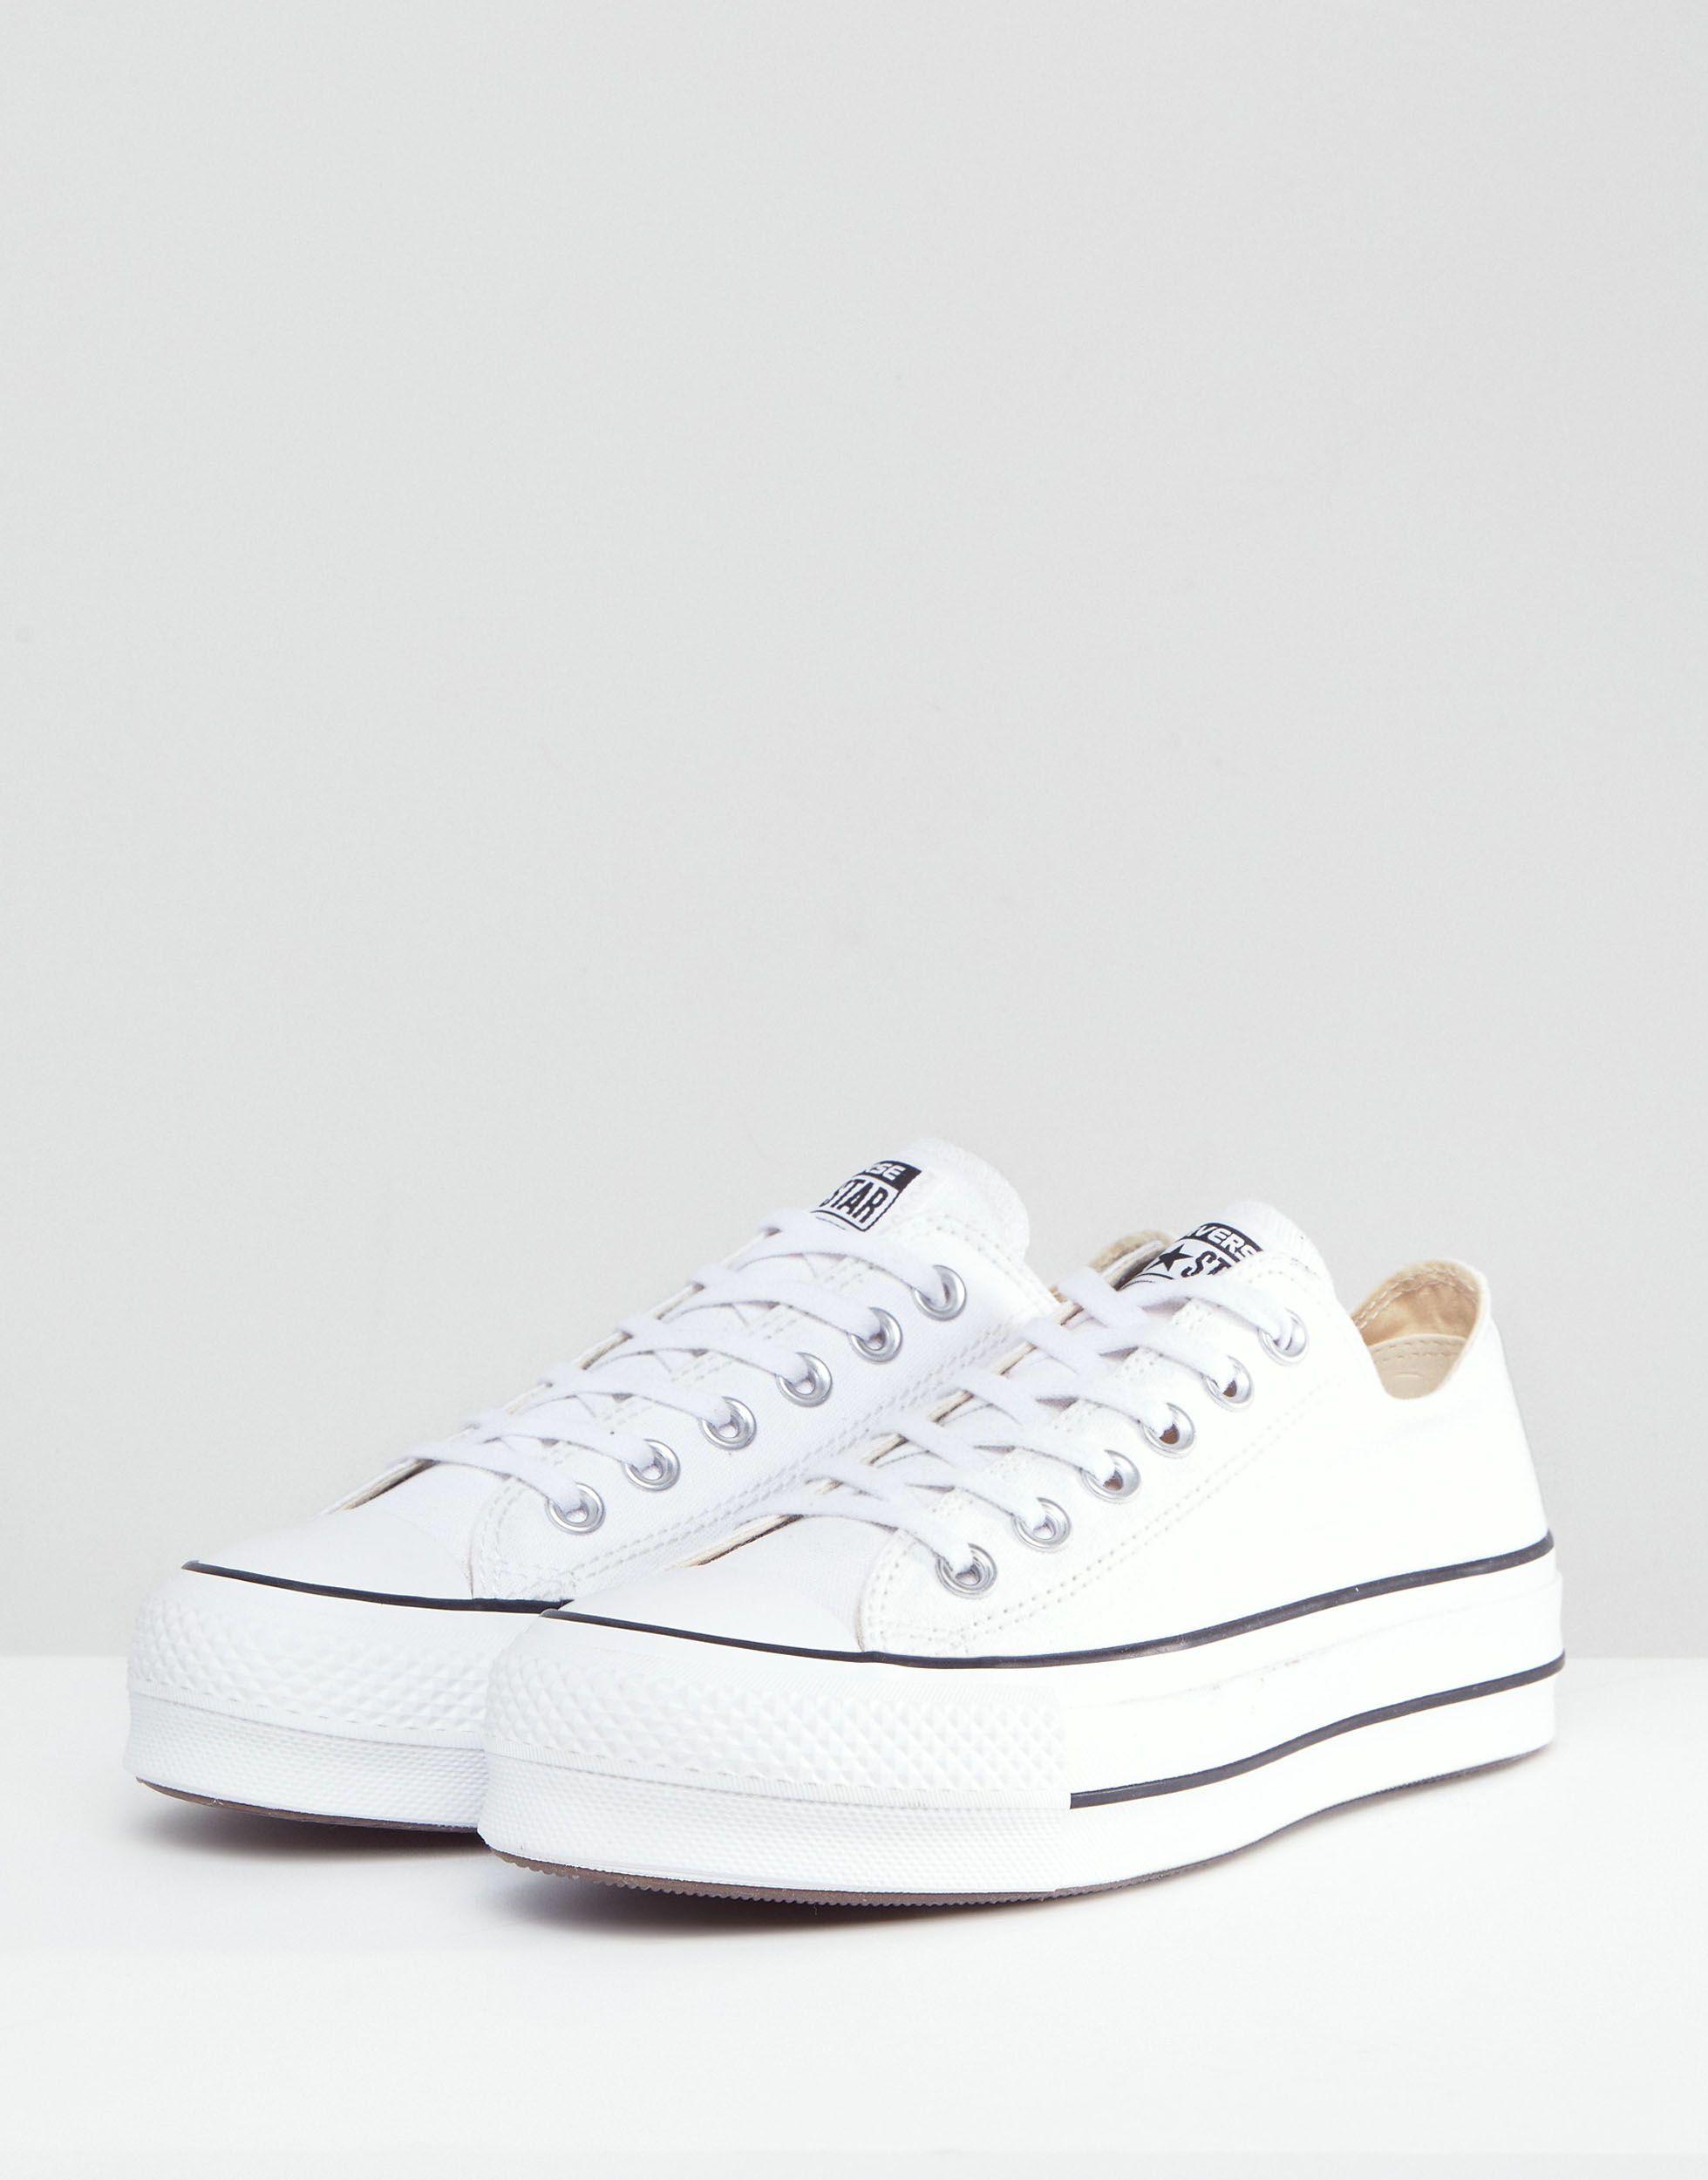 Converse Canvas Chuck Taylor All Star Platform Ox Trainers in White | Lyst